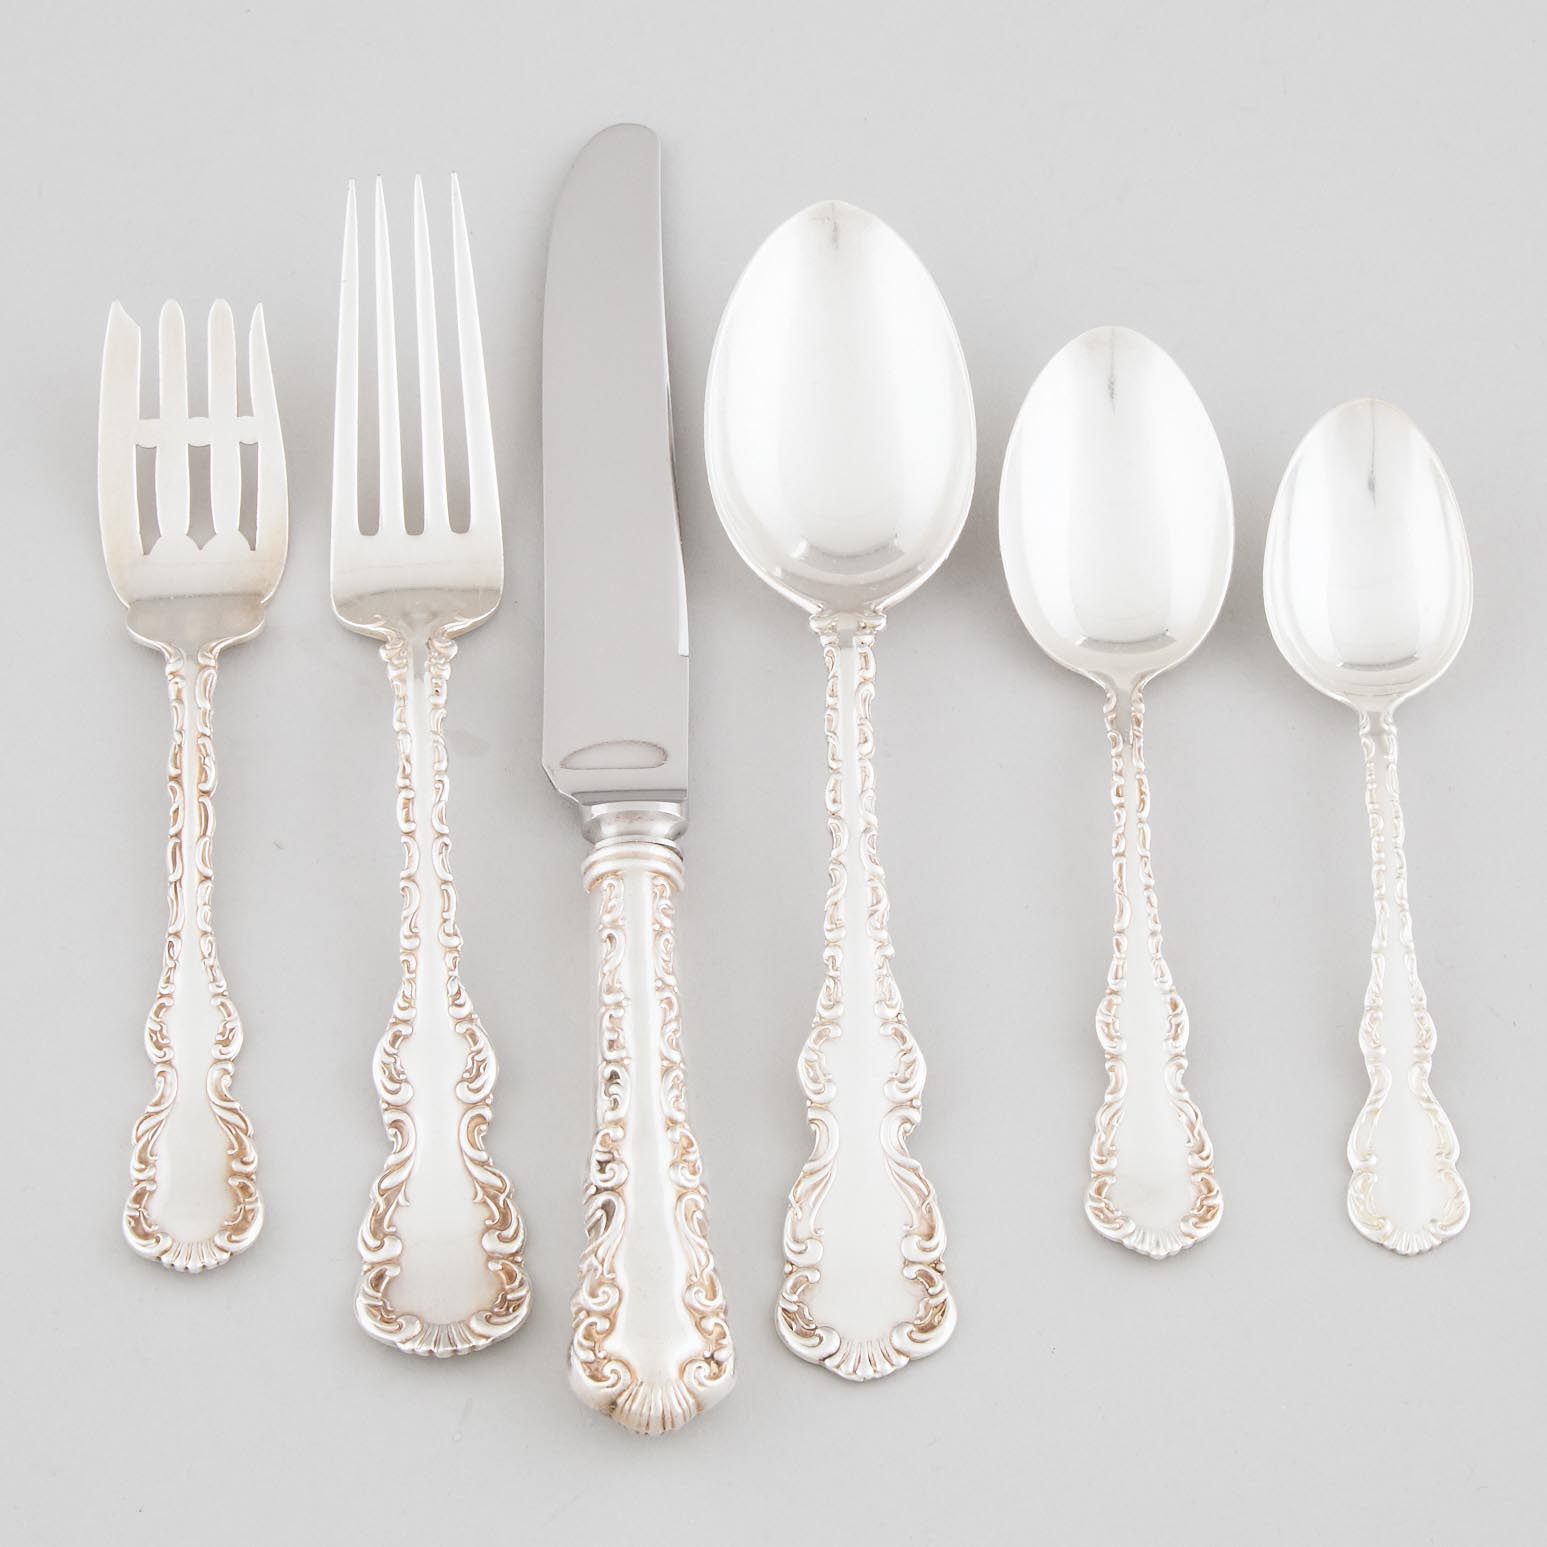 Canadian Silver 'Louis XV' Pattern Flatware, Roden Bros., Toronto, Ont., 20th century